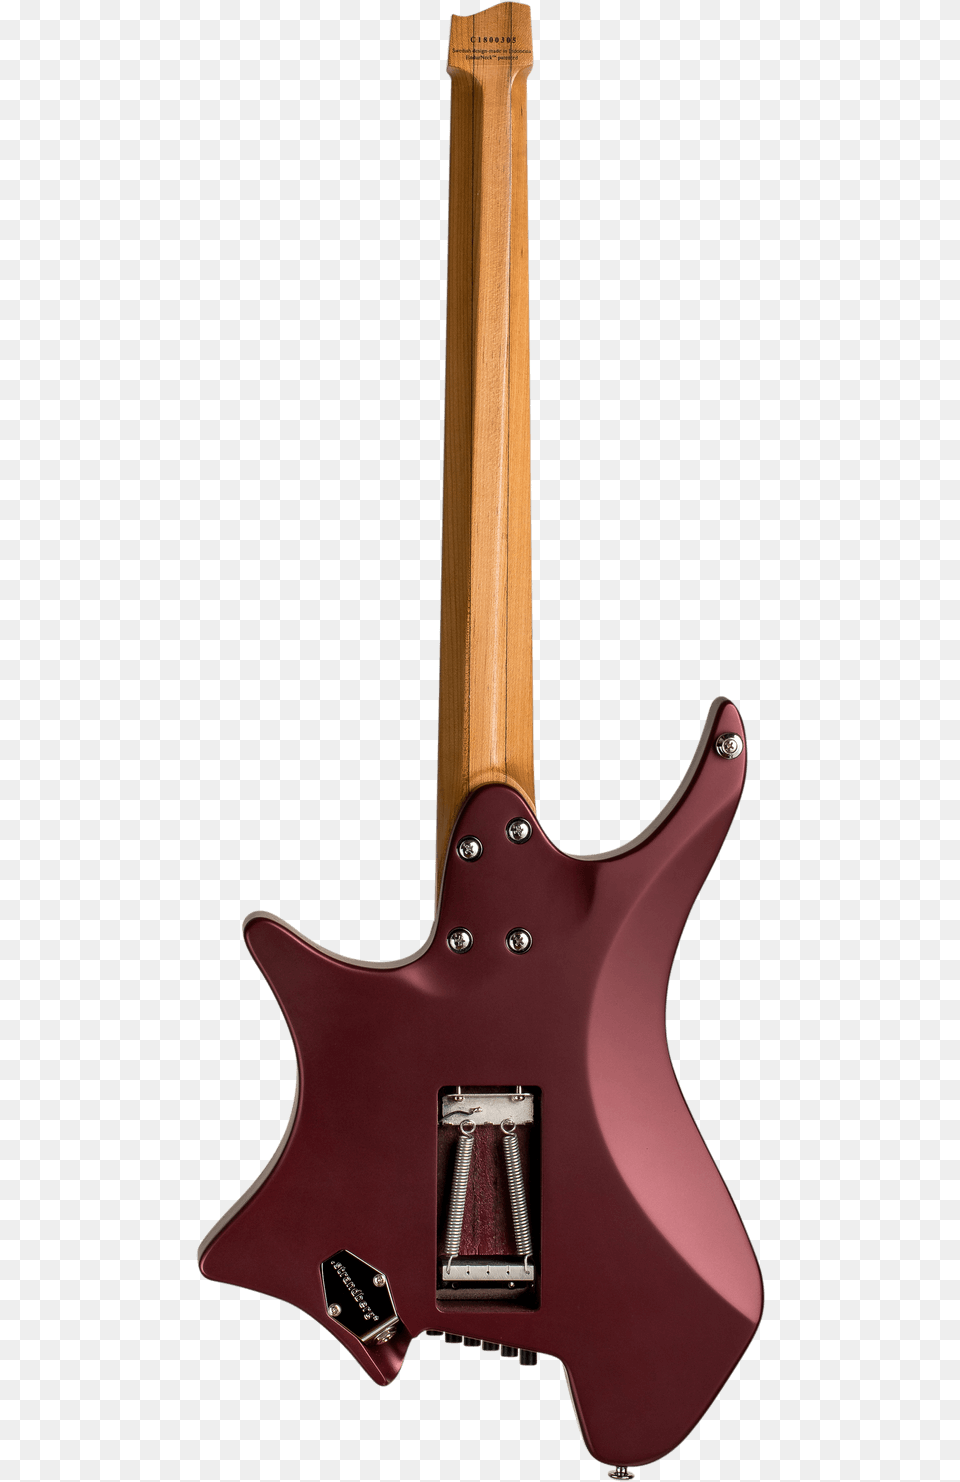 Boden Classic 6 Trem Burgundy Mist Kiesel Icon Bass Youtube, Electric Guitar, Guitar, Musical Instrument, Bass Guitar Free Png Download